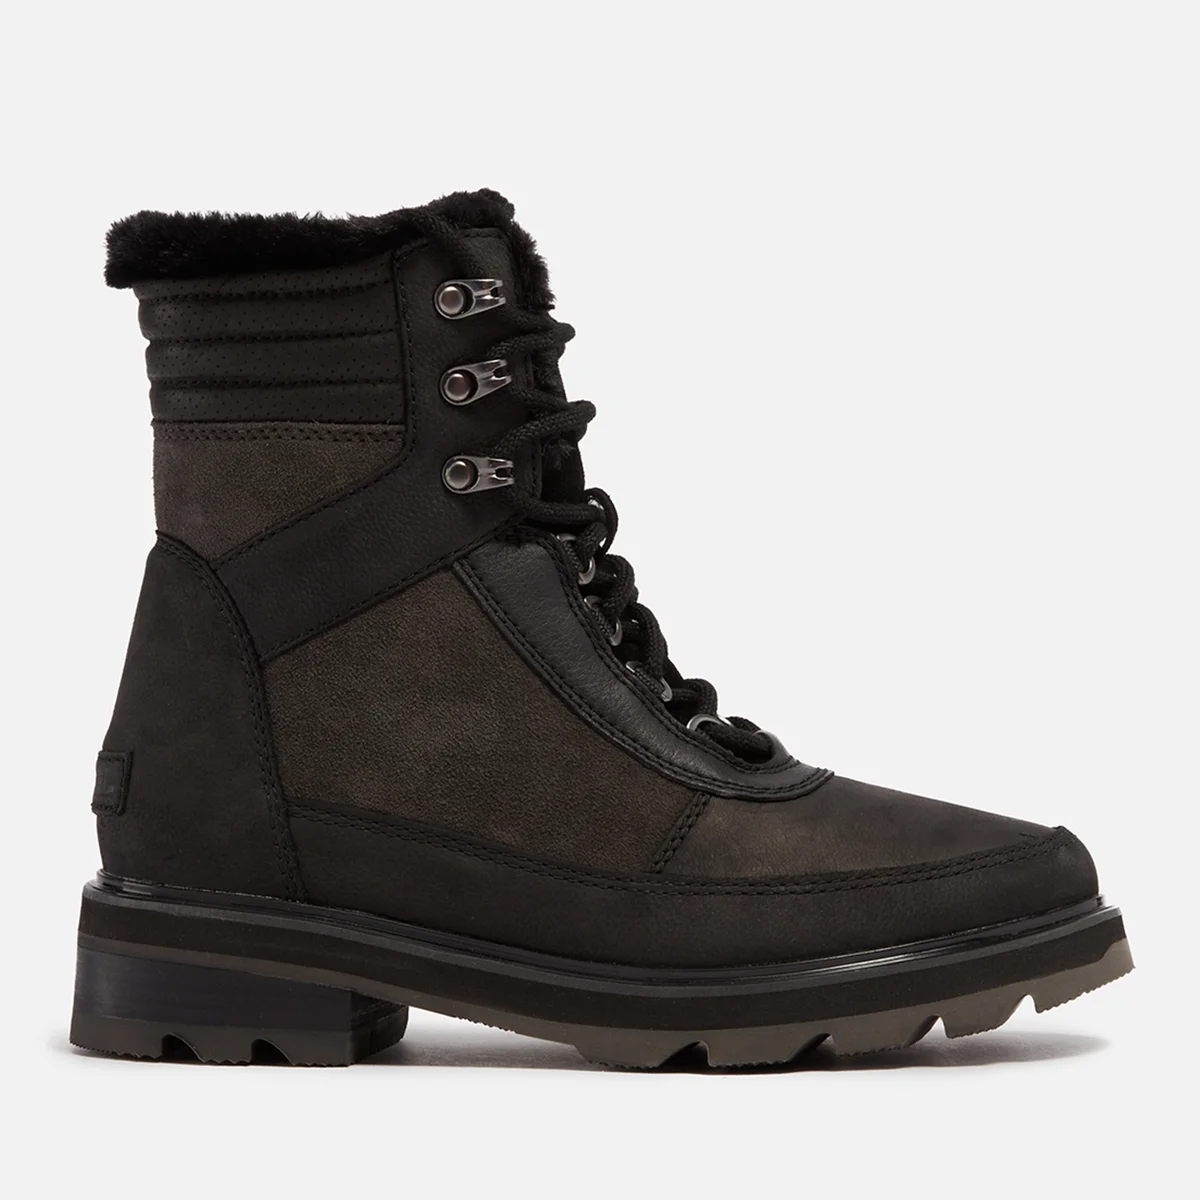 Sorel Lennox Waterproof Leather and Suede Boots Image 1